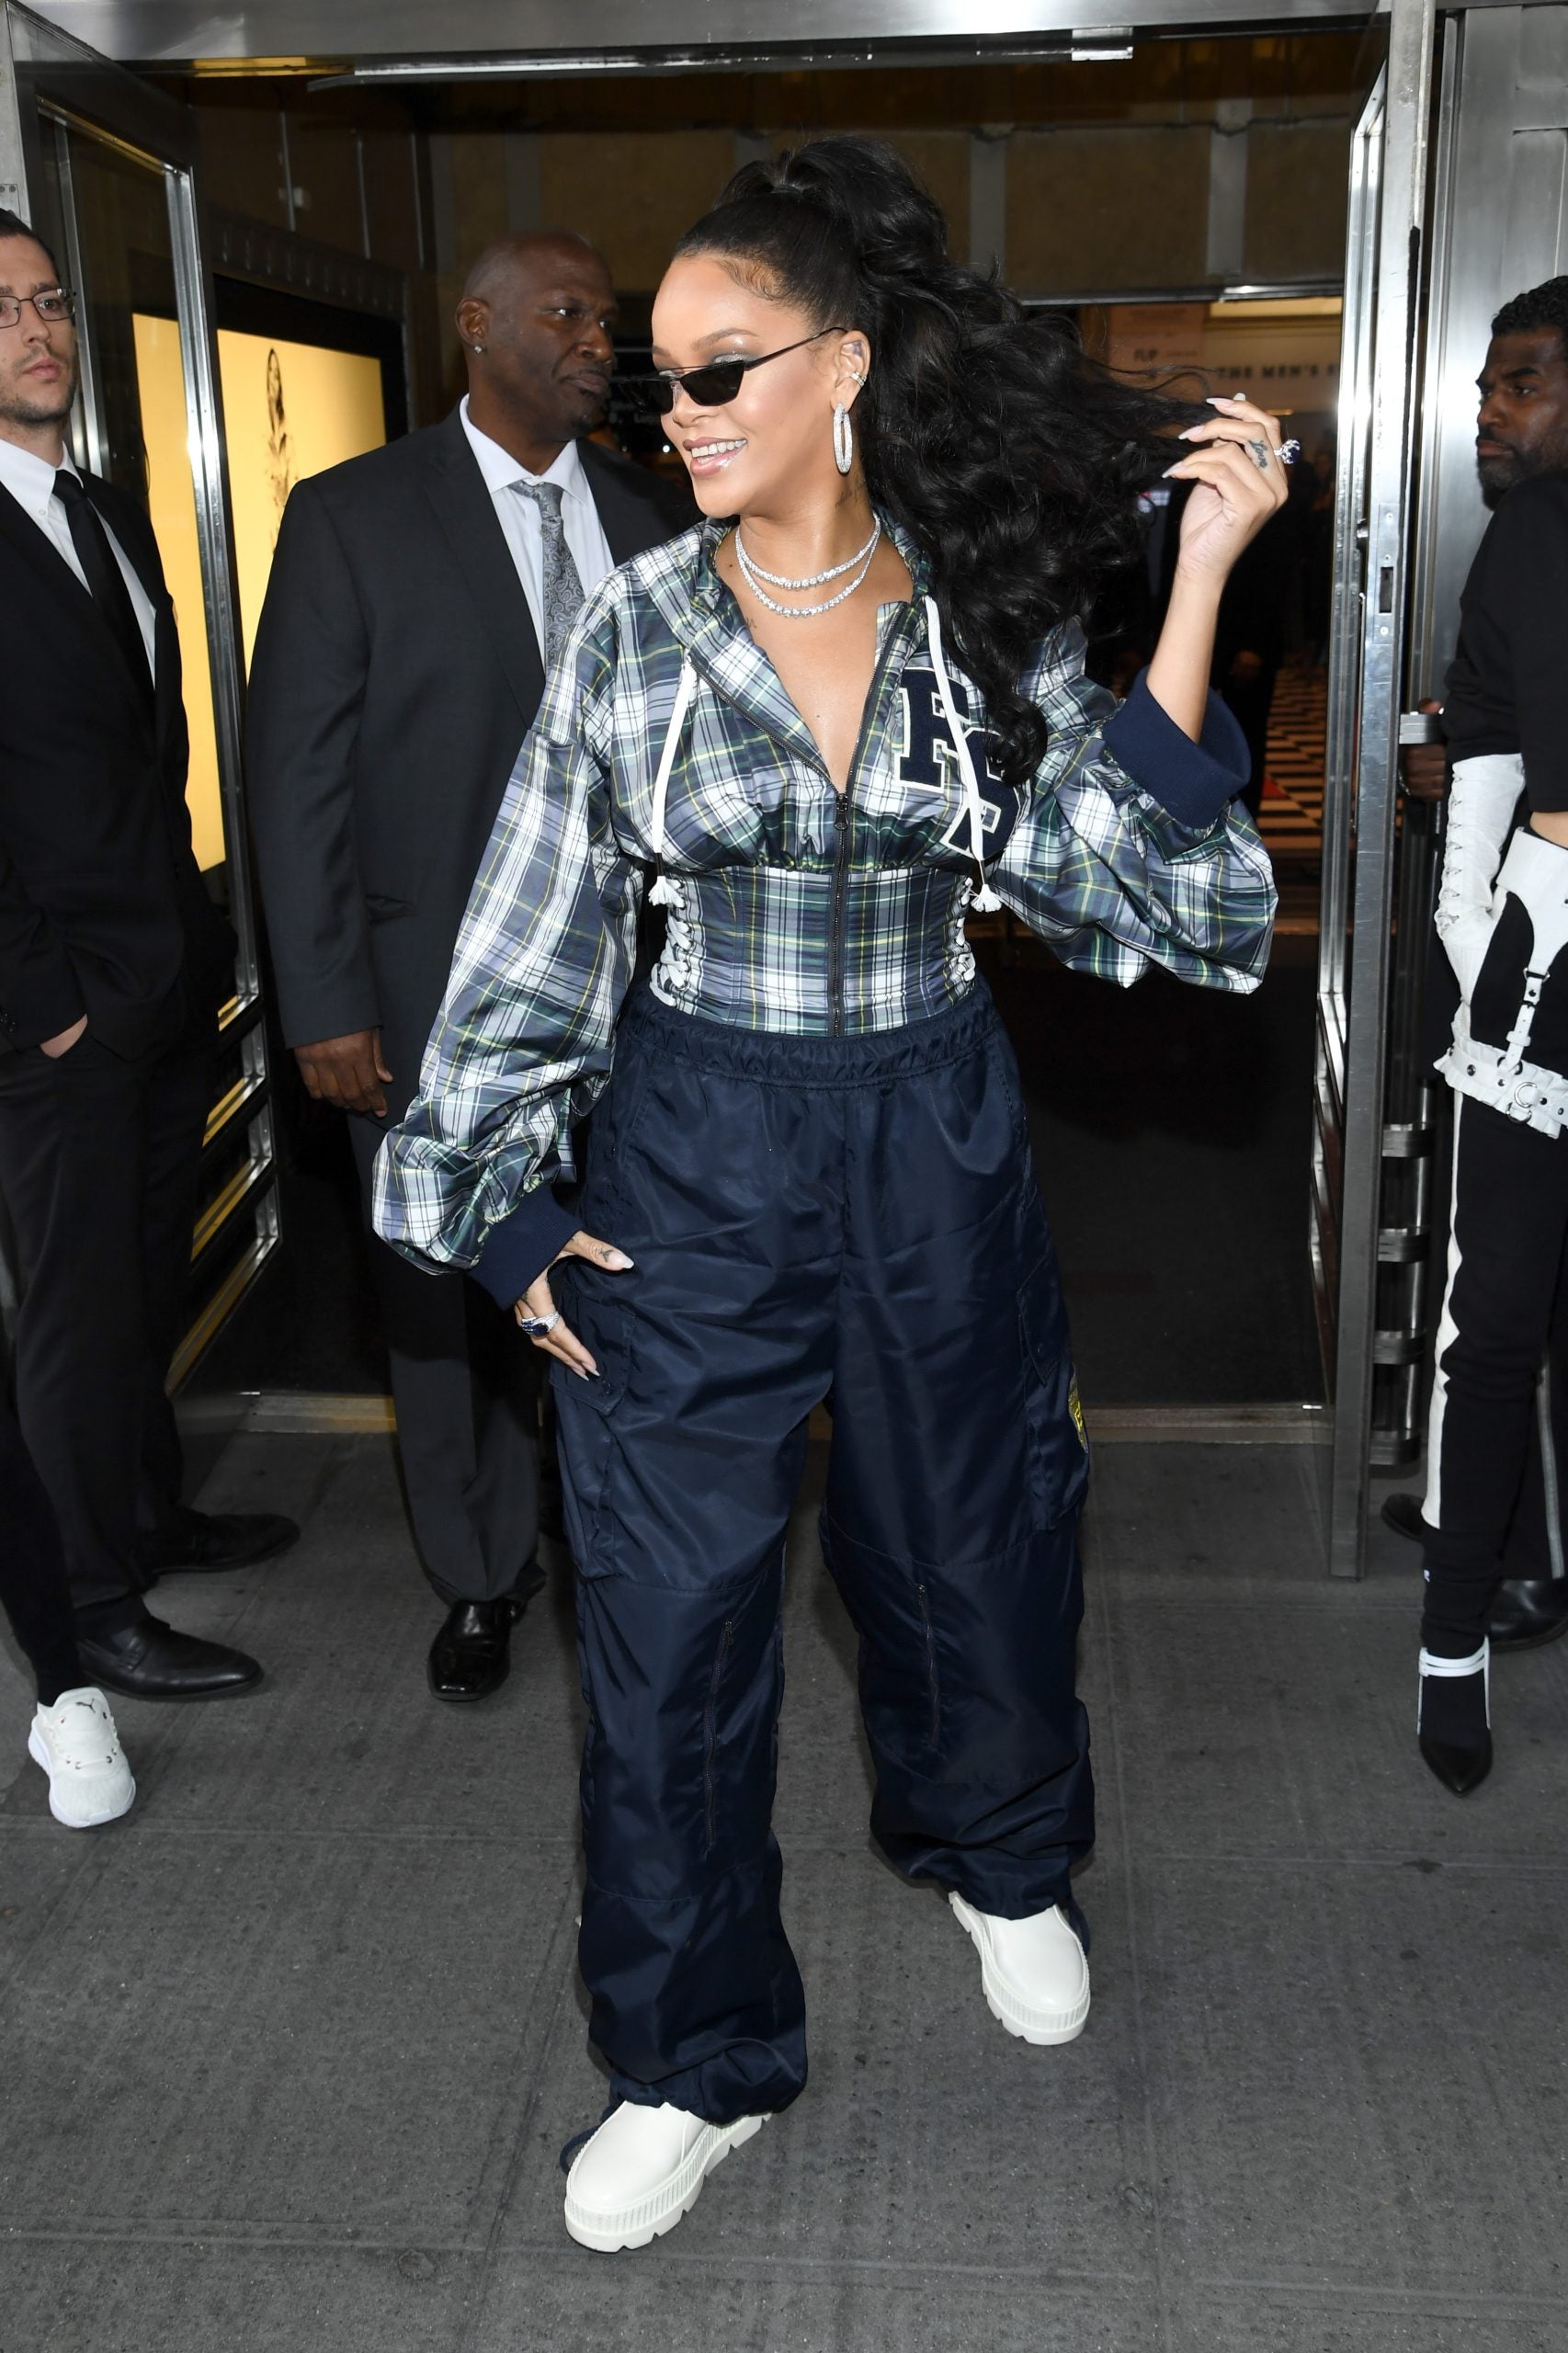 How To Channel Your Inner Rihanna For Street Style Looks